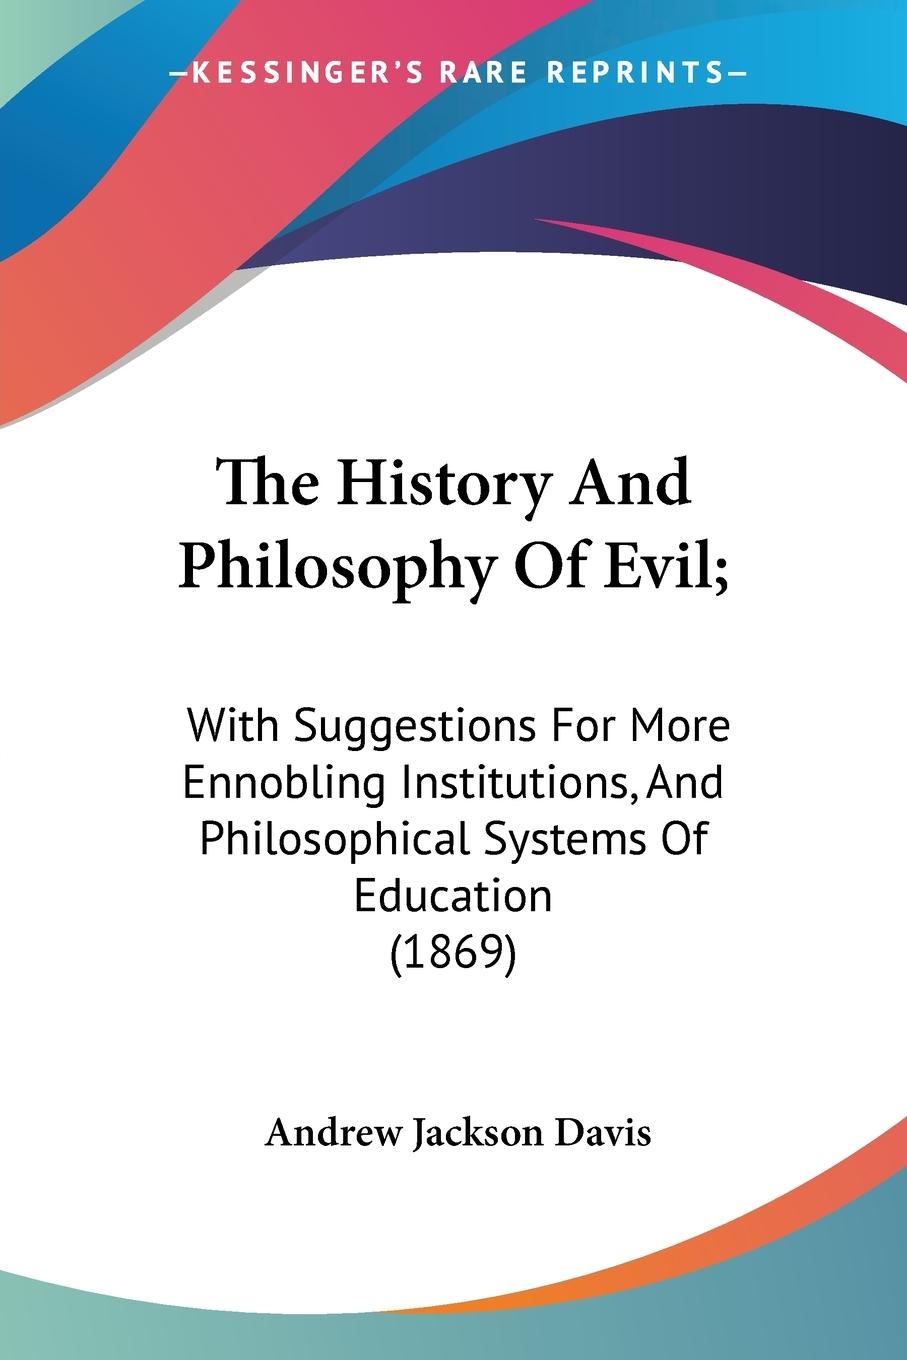 The History And Philosophy Of Evil - Davis, Andrew Jackson